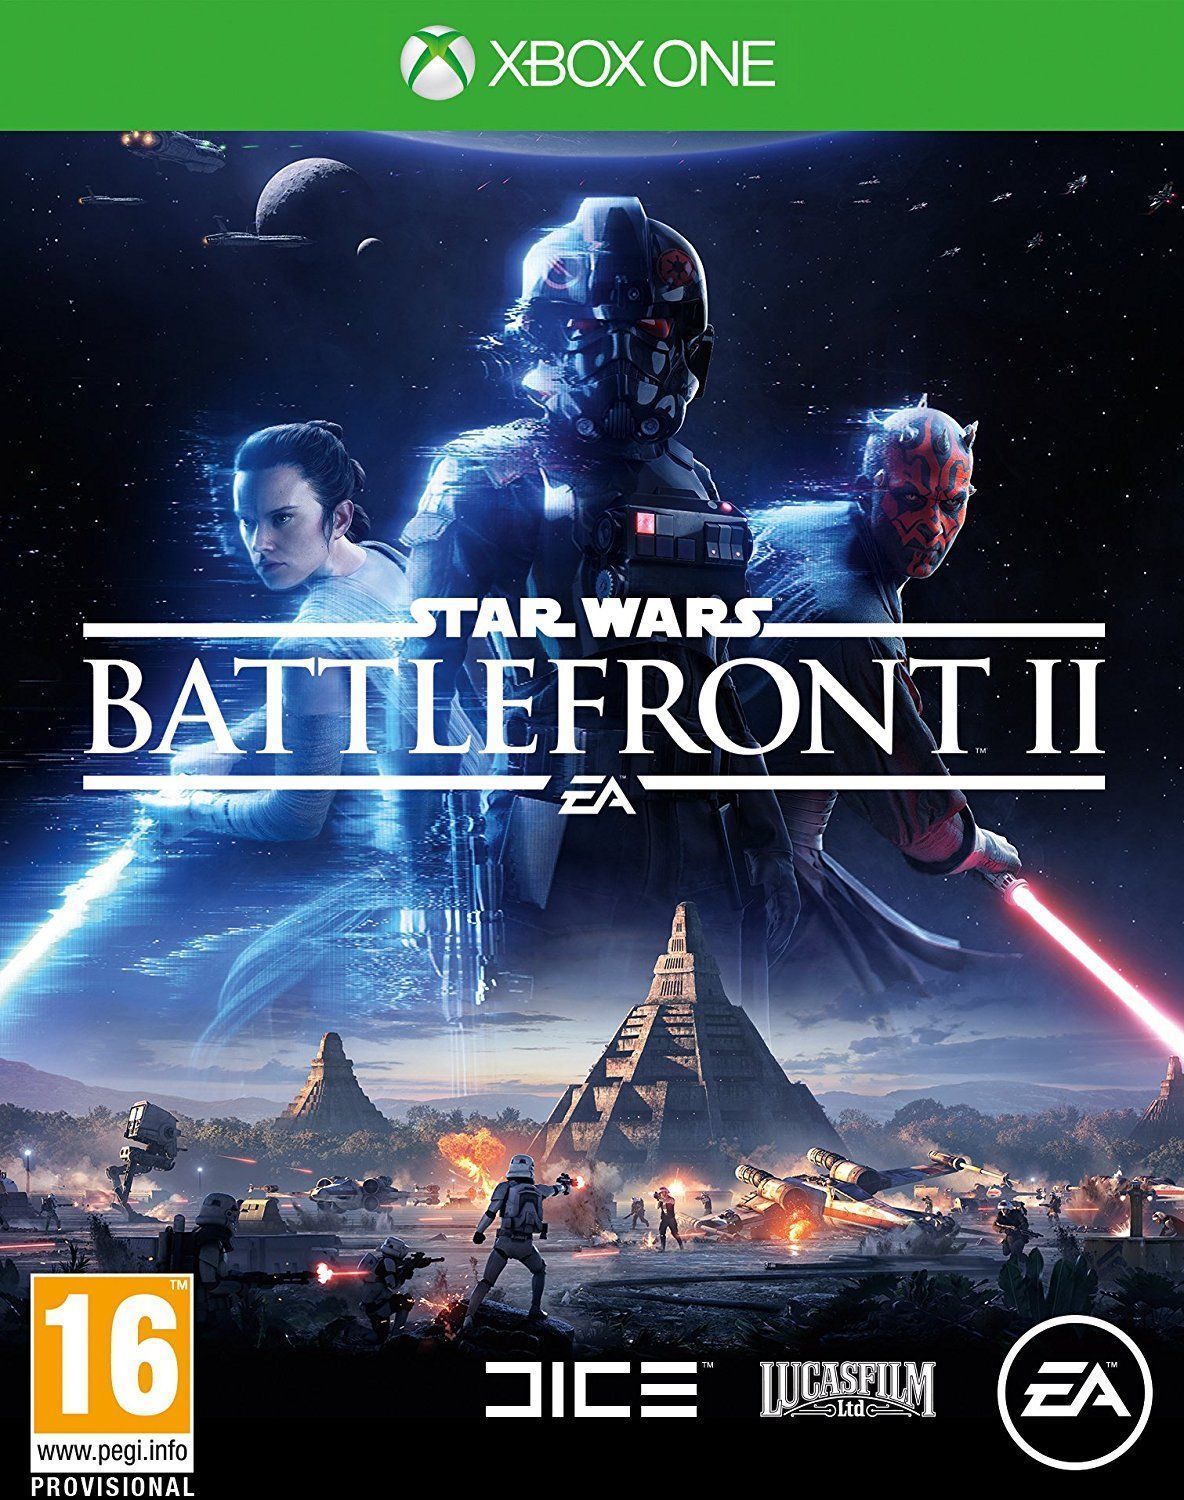 Battlefront 2 Star Wars XBox One XB1 Pre-Order Physical Copy UK Sealed